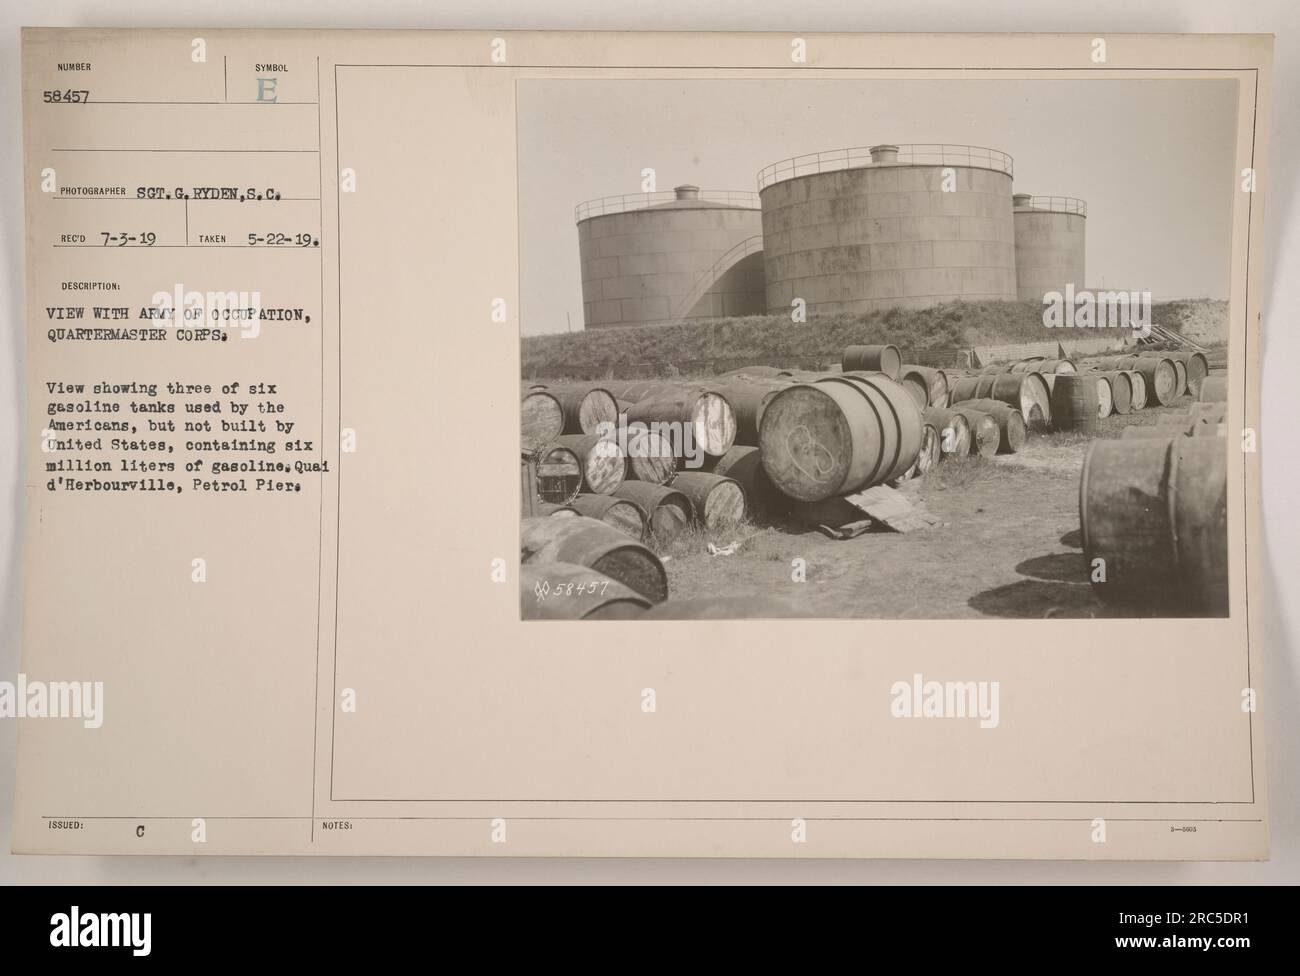 Three of six gasoline tanks used by the American Army of Occupation, QuarterMaster Corps, containing six million liters of gasoline. These tanks were not built by the United States and are located at the Quai d'Herbourville, Petrol Piers. Photograph taken on May 22, 1919, by SOT. G. Ryden.S.C. (Source: 4058457) Stock Photo